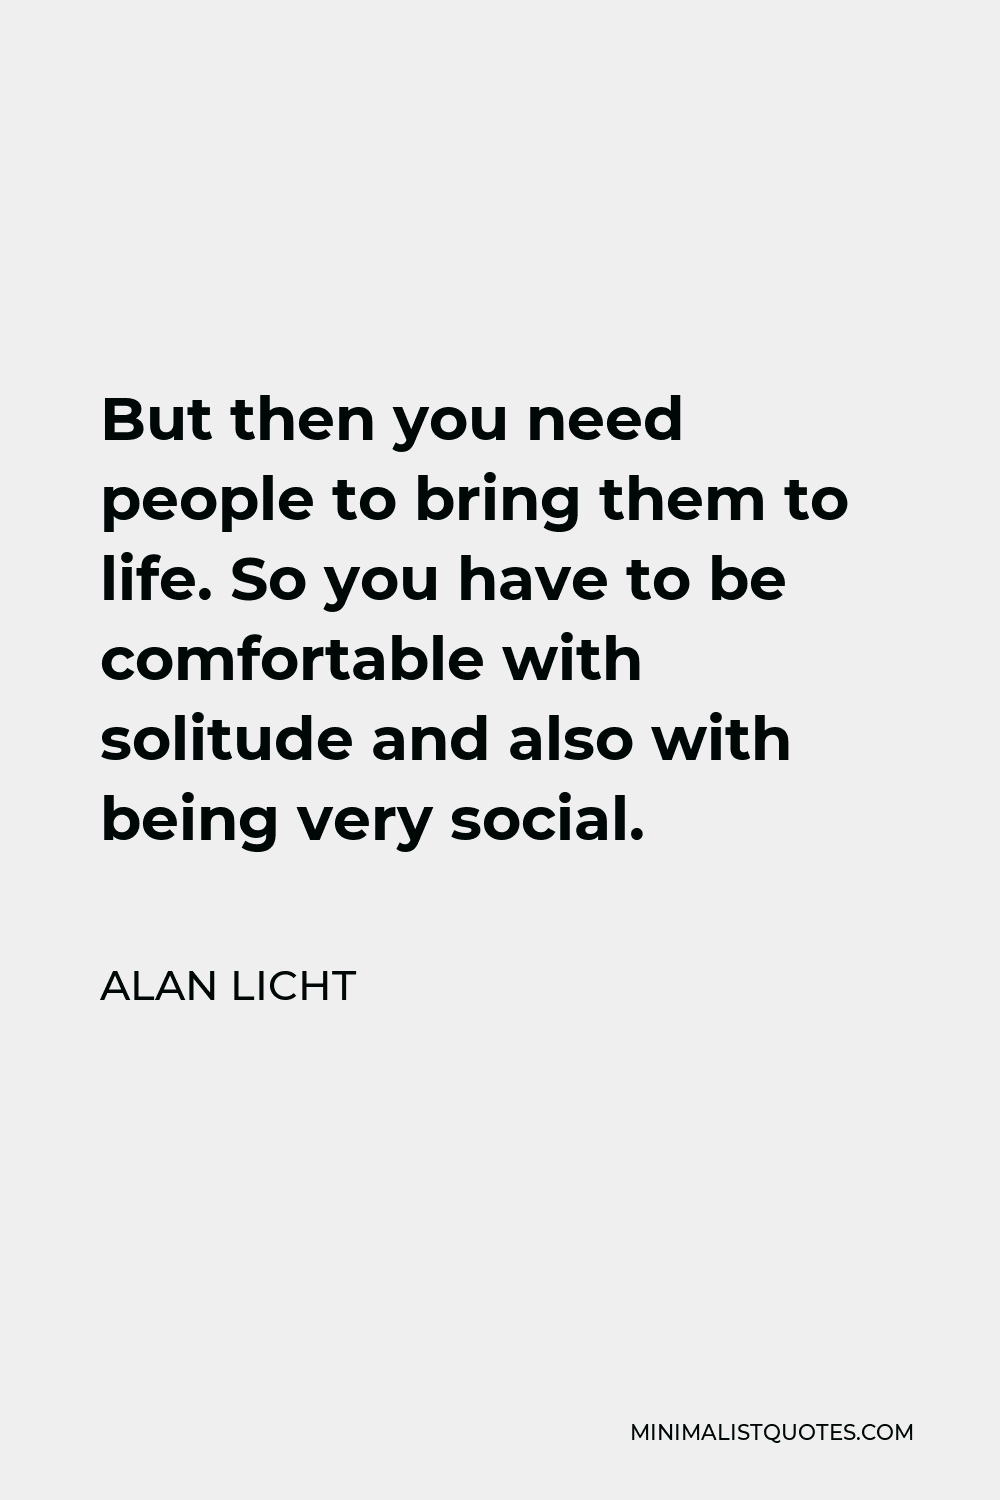 Alan Licht Quote - But then you need people to bring them to life. So you have to be comfortable with solitude and also with being very social.